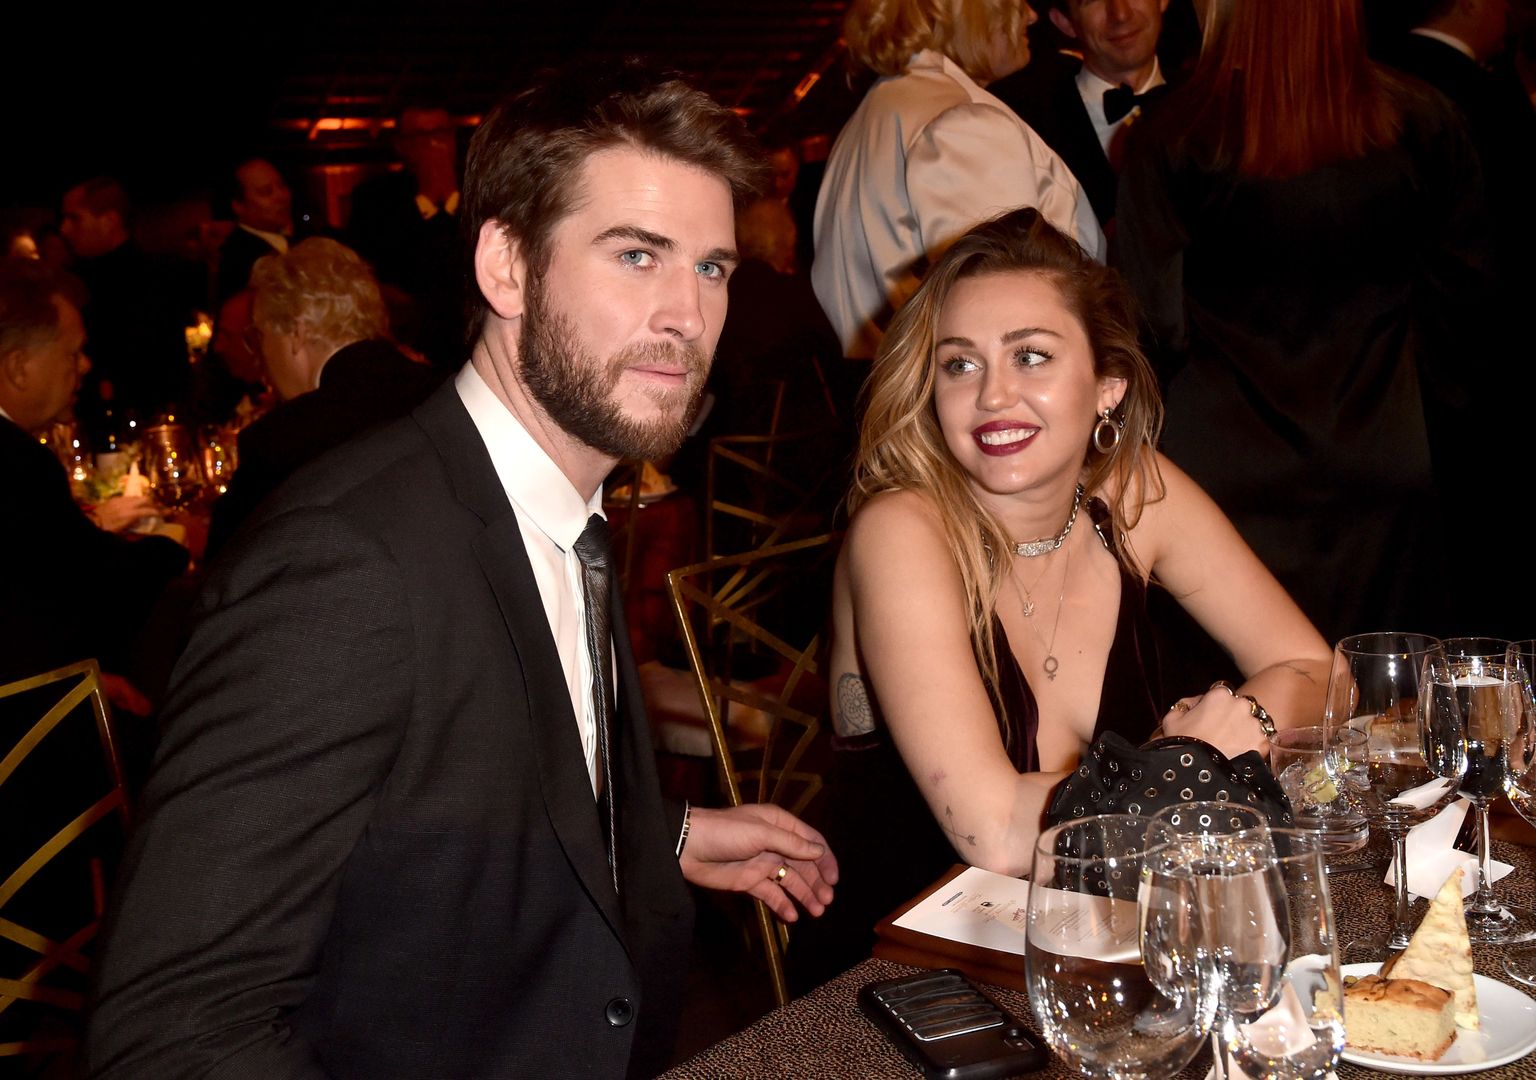 CULVER CITY, CALIFORNIA - JANUARY 26: Liam Hemsworth and Miley Cyrus attend the 16th annual G Day USA Los Angeles Gala at 3LABS on January 26, 2019 in Culver City, California.   Alberto E. Rodriguez/Getty Images/AFP